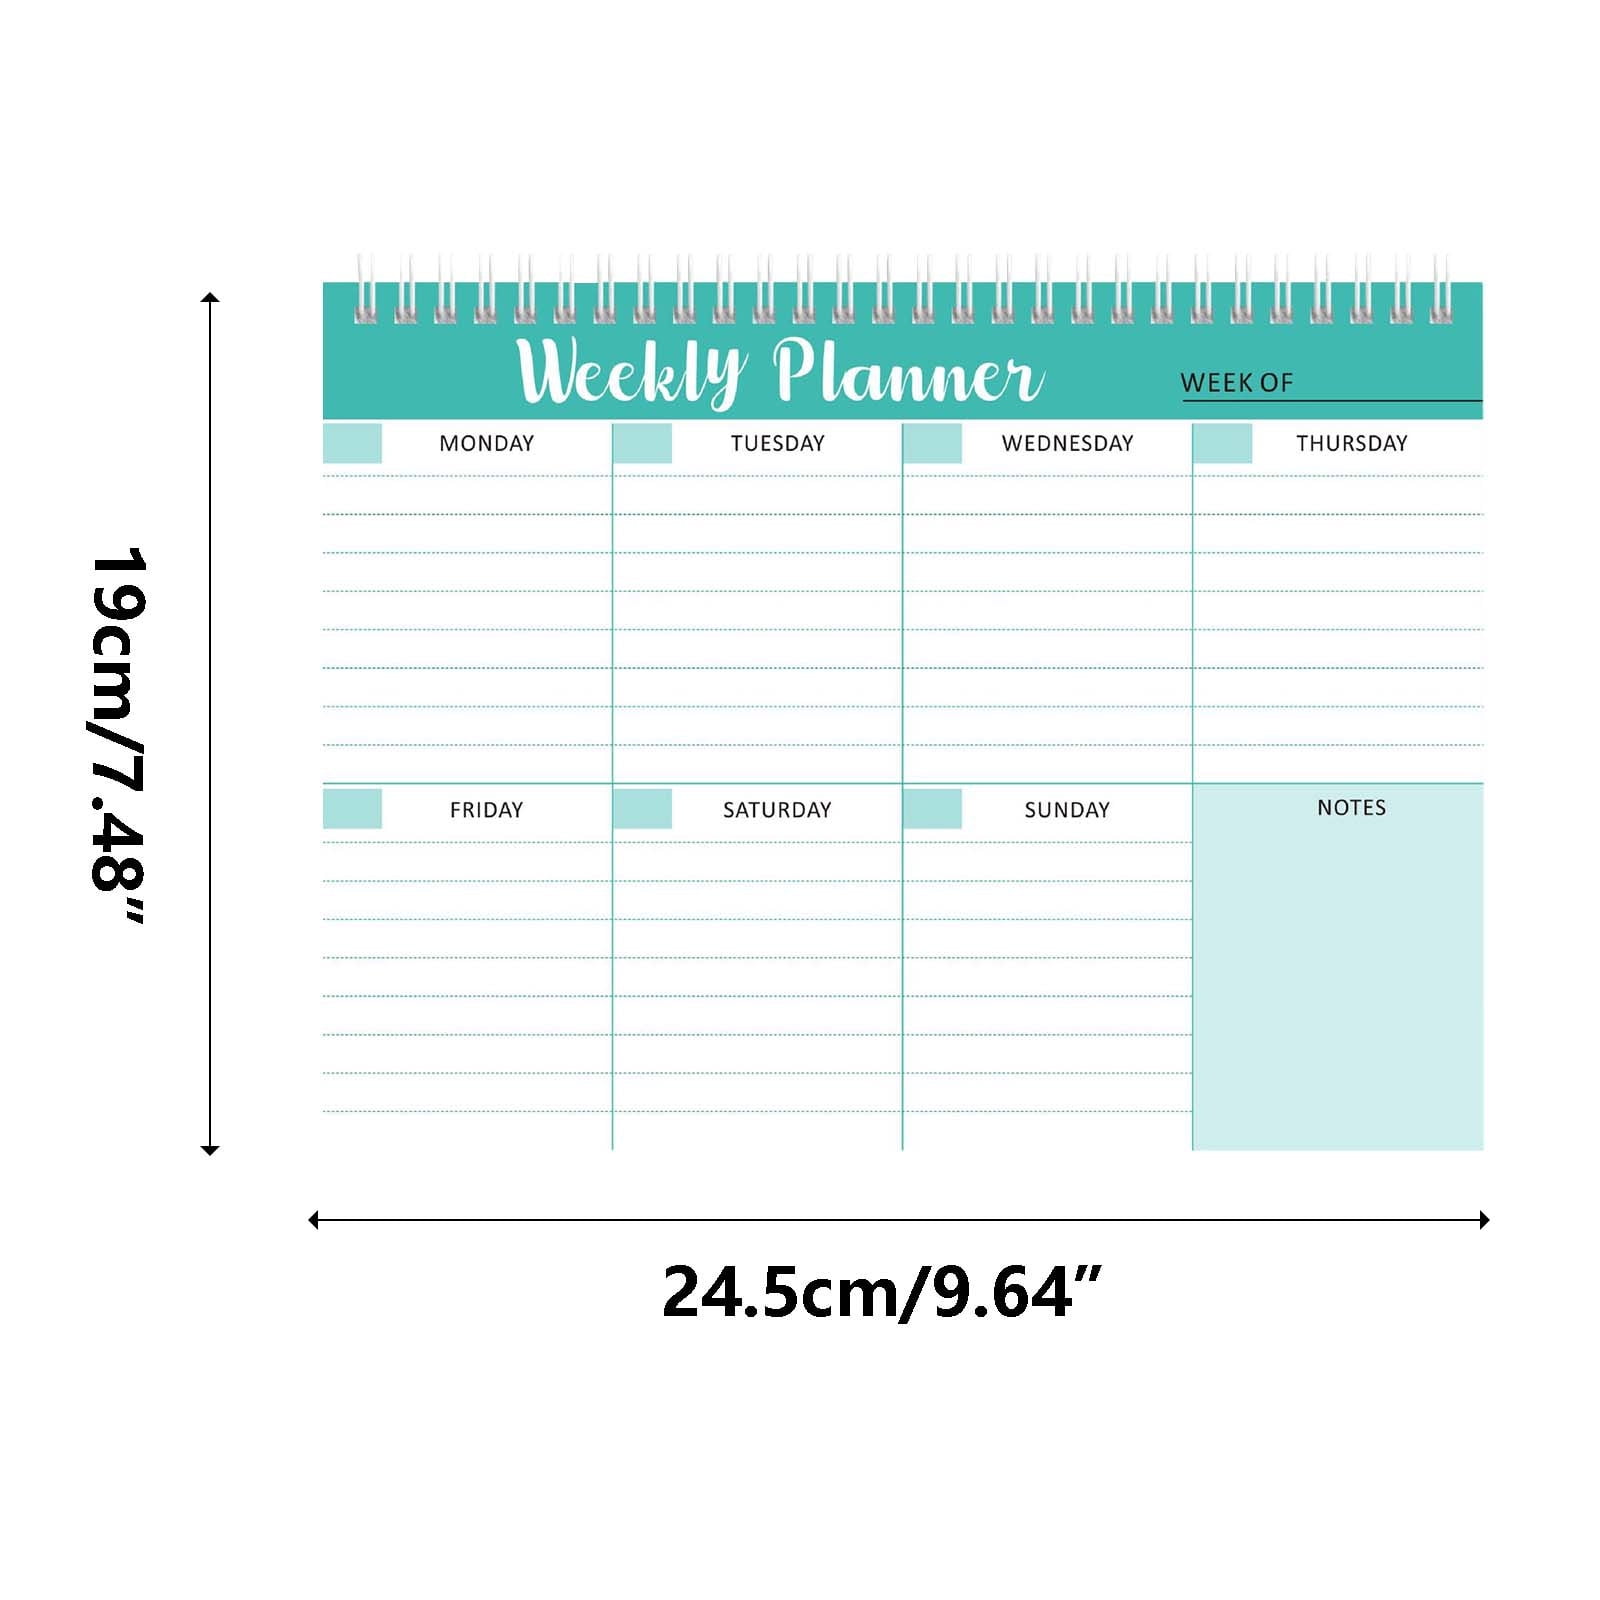 Undated Planner Monthly and Weekly Layouts Agenda 52 White Binder 